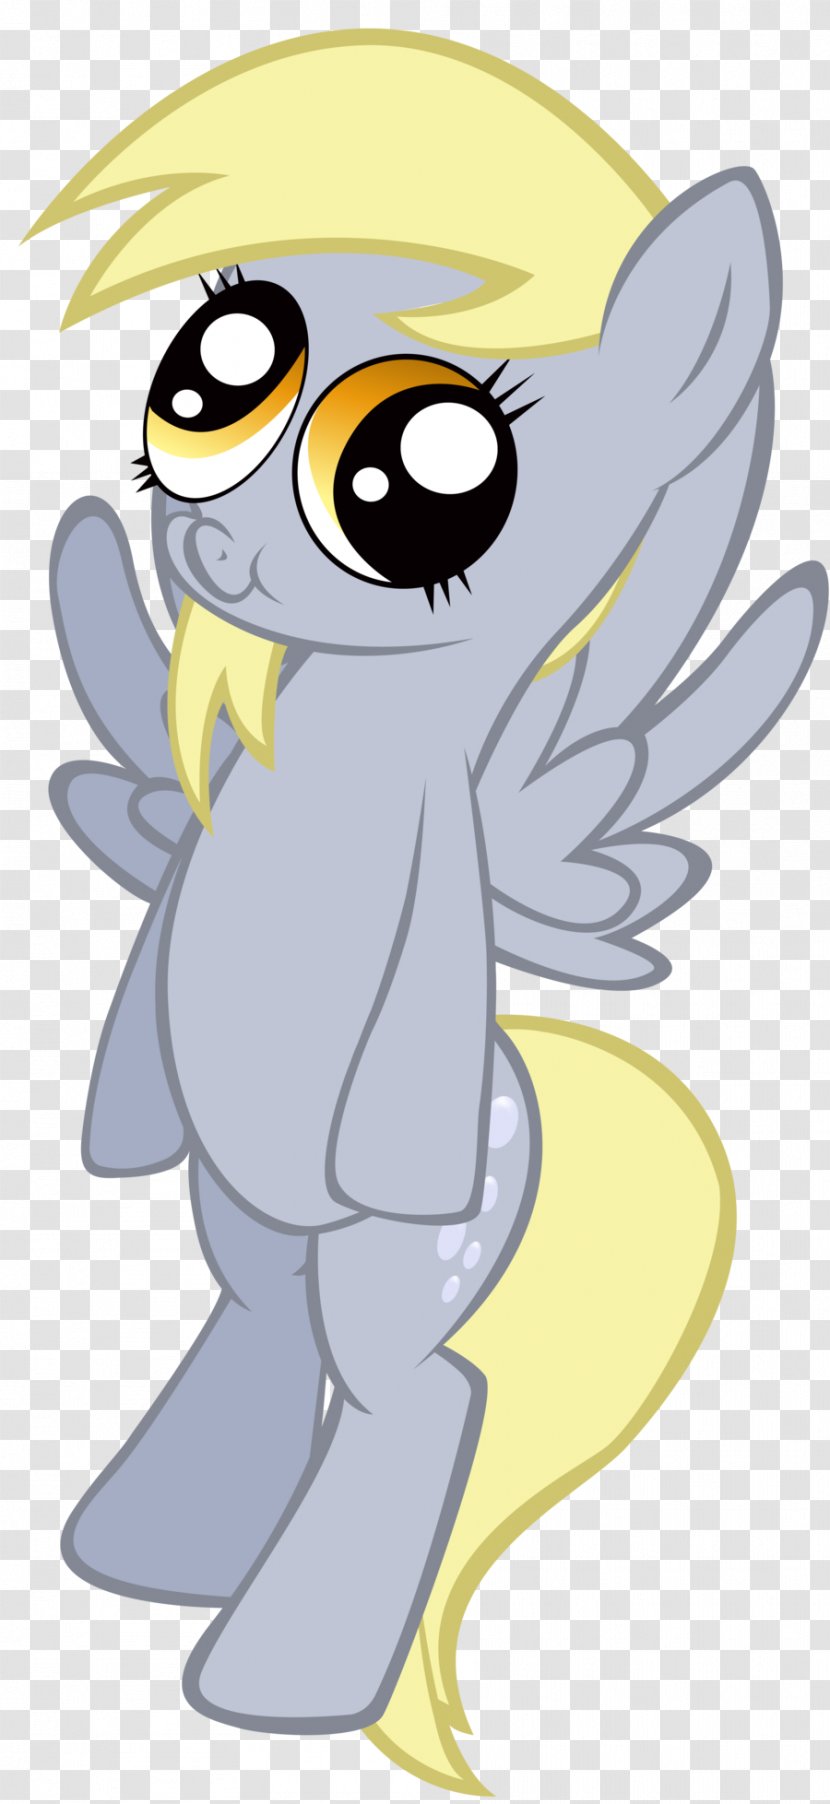 Illustration Horse Pony Derpy Hooves Mammal - Yellow - Twilight Sparkle Transparent PNG